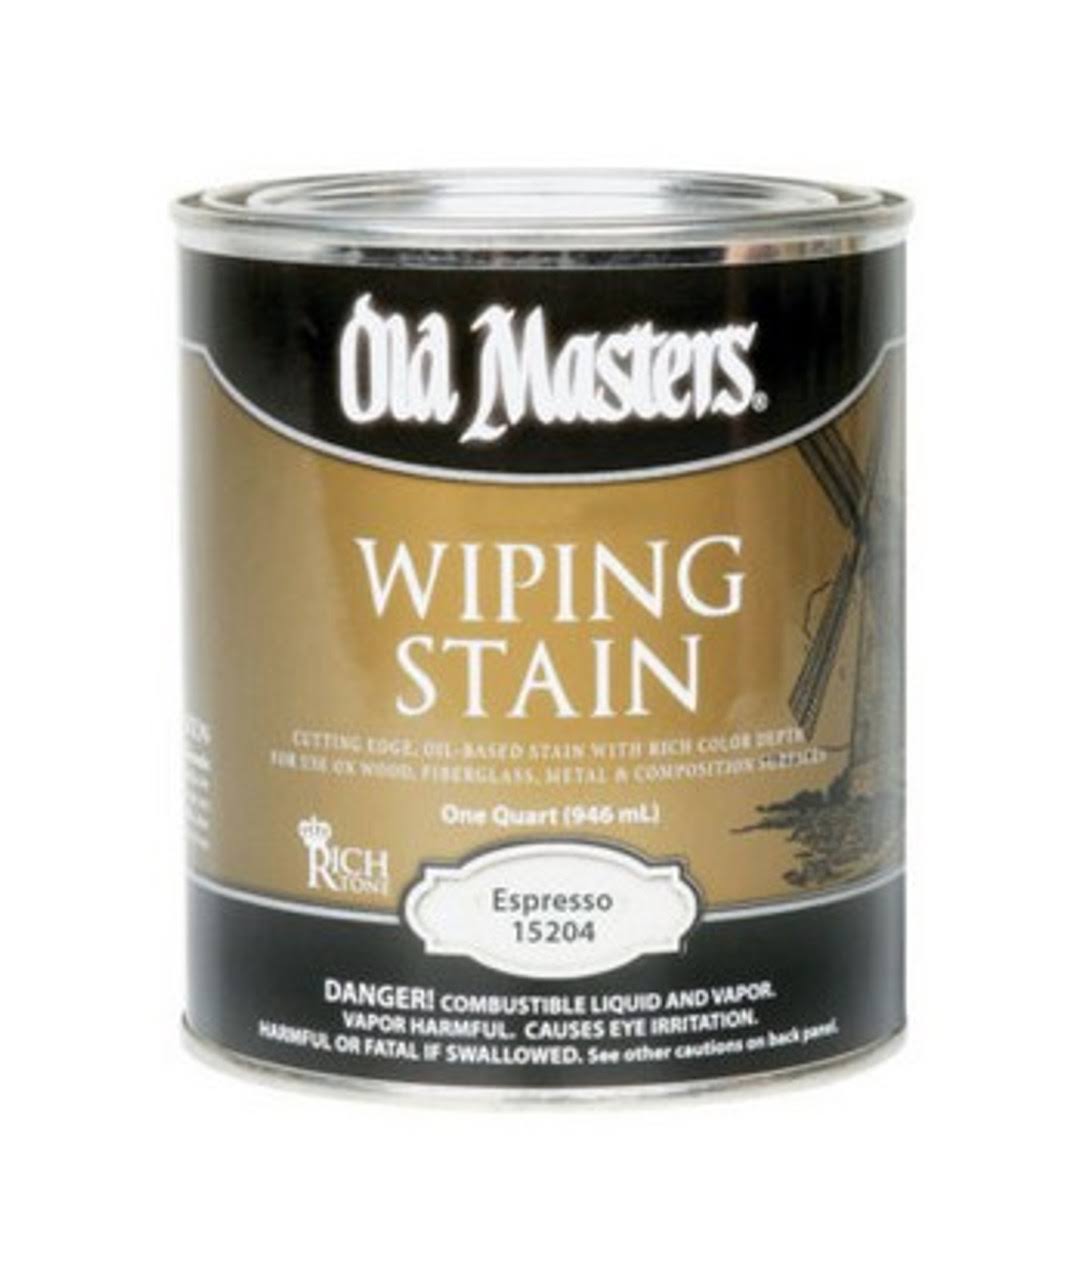 Old Masters 15204 Wiping Stain, Clear, Espresso, 1 Qt